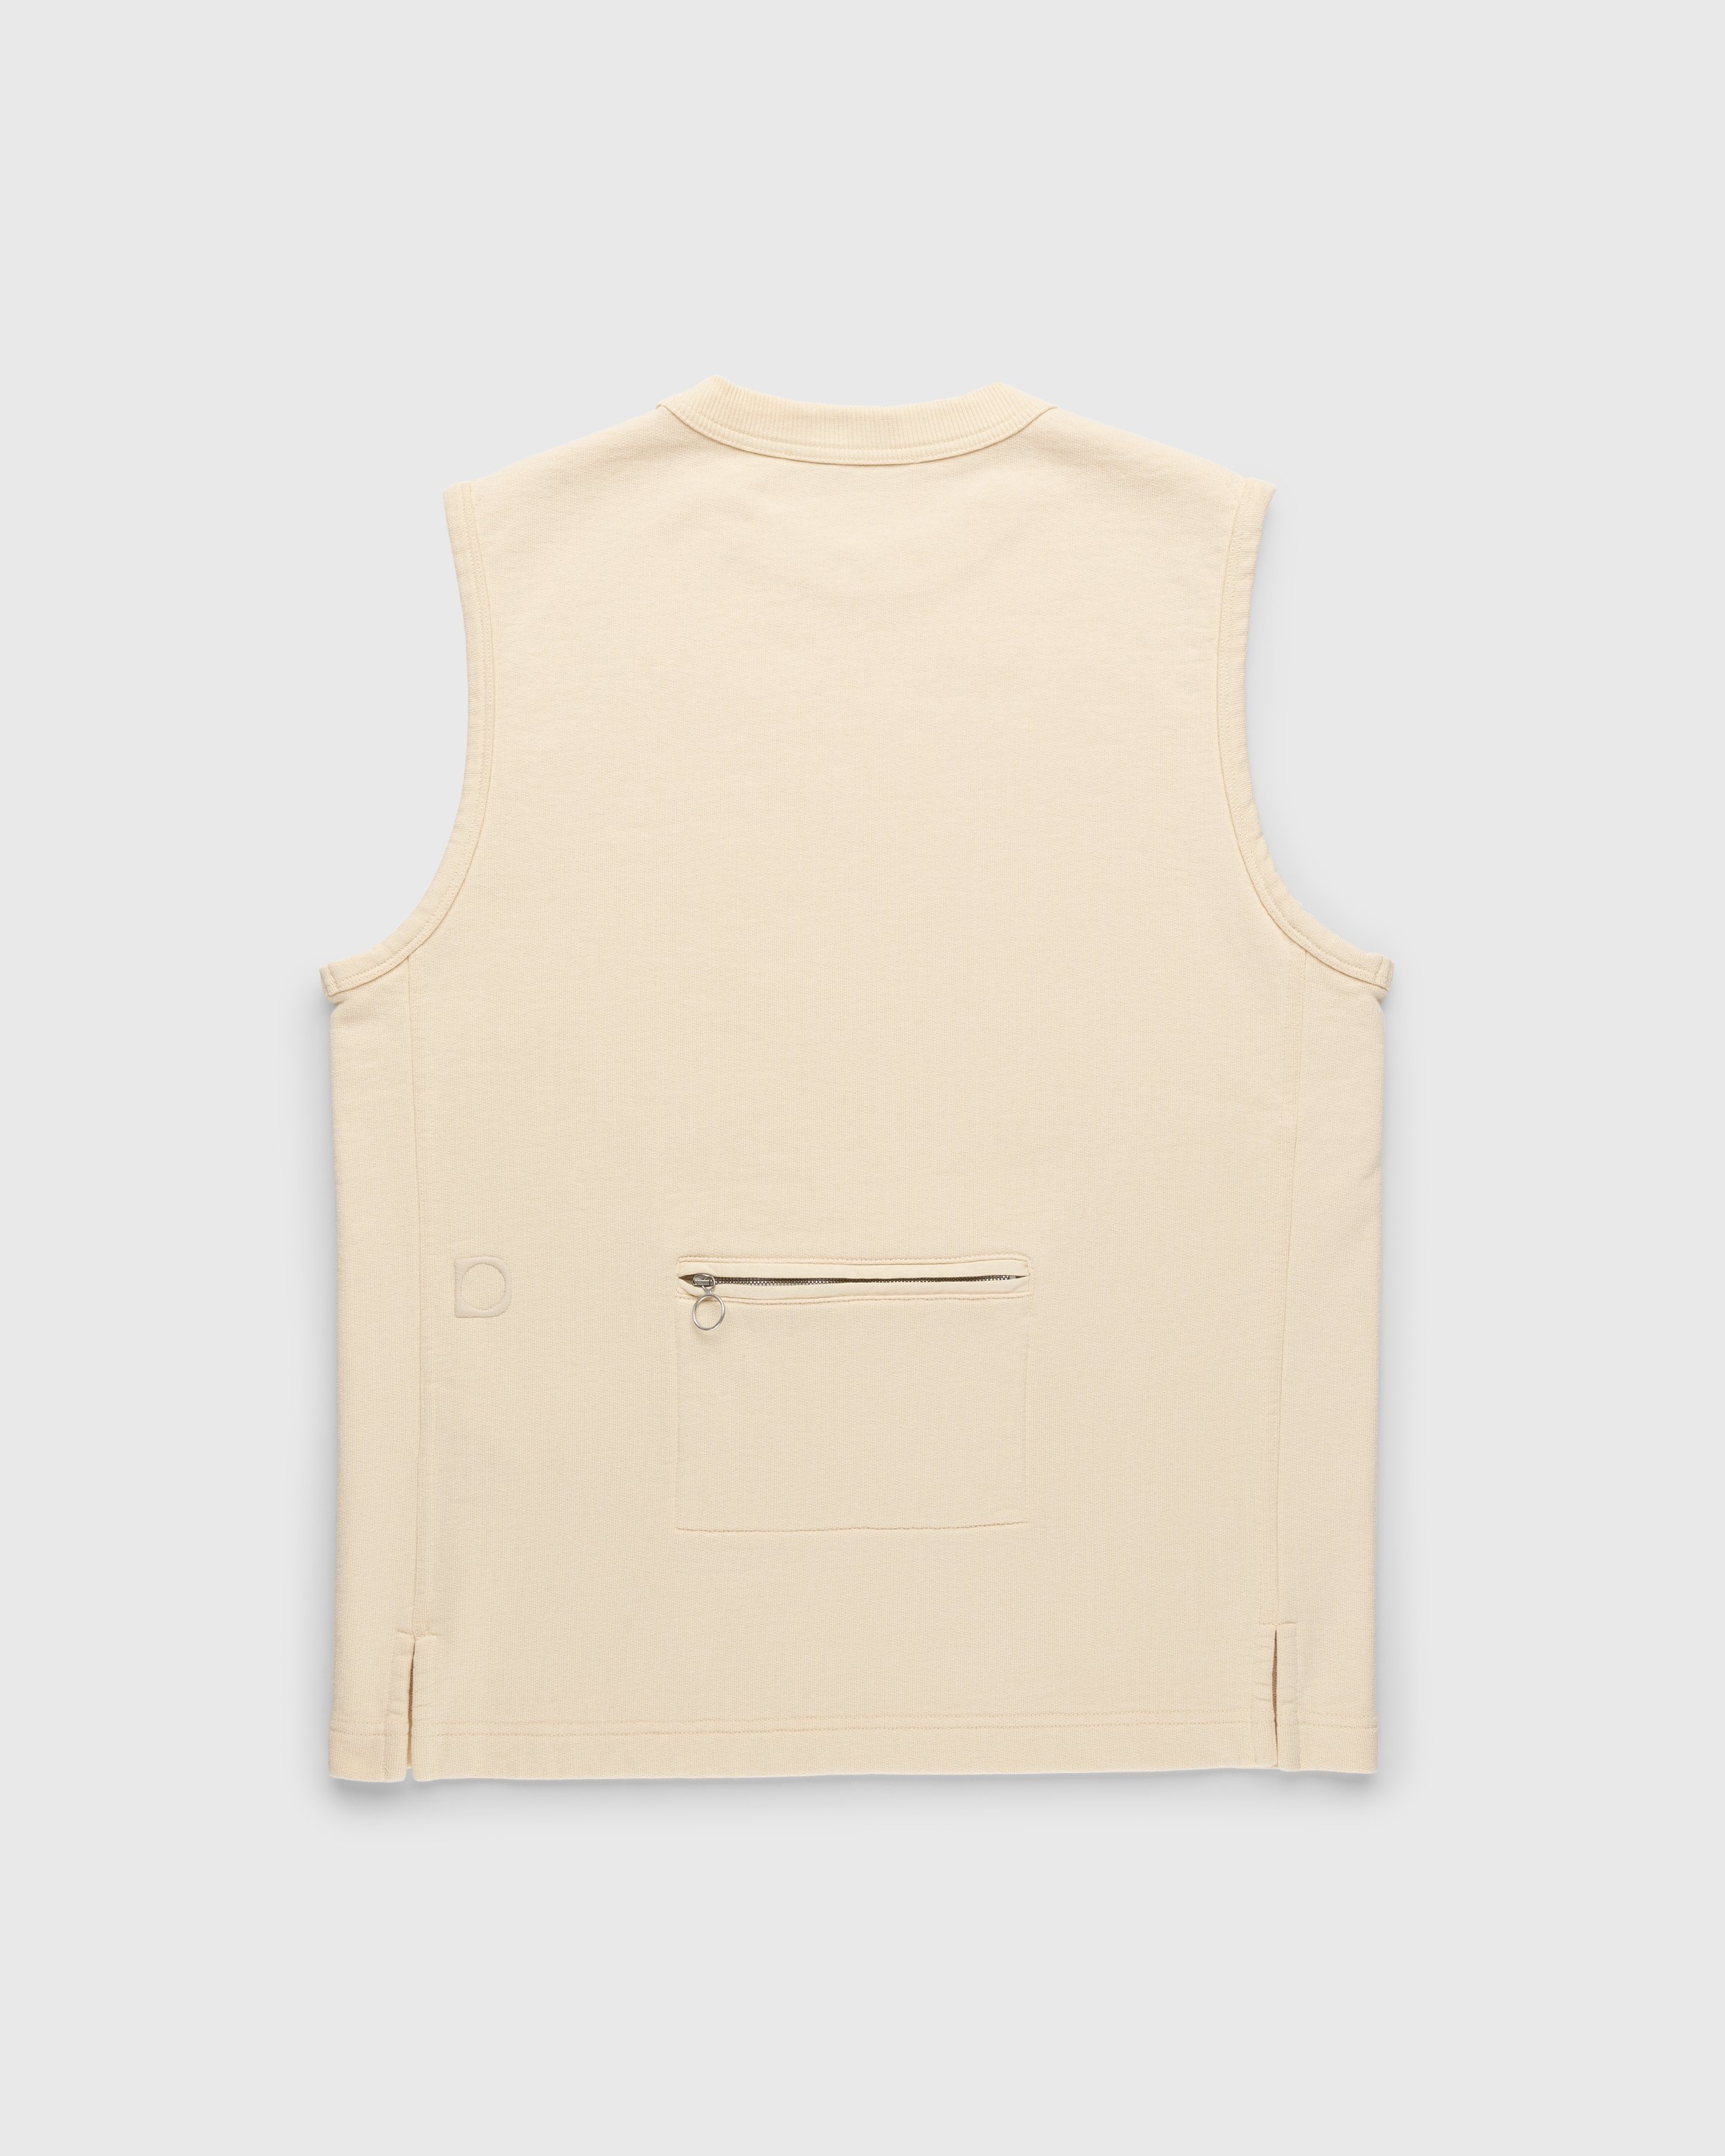 Diomene by Damir Doma - Cotton Gilet Cloud Cream - Clothing - Beige - Image 2